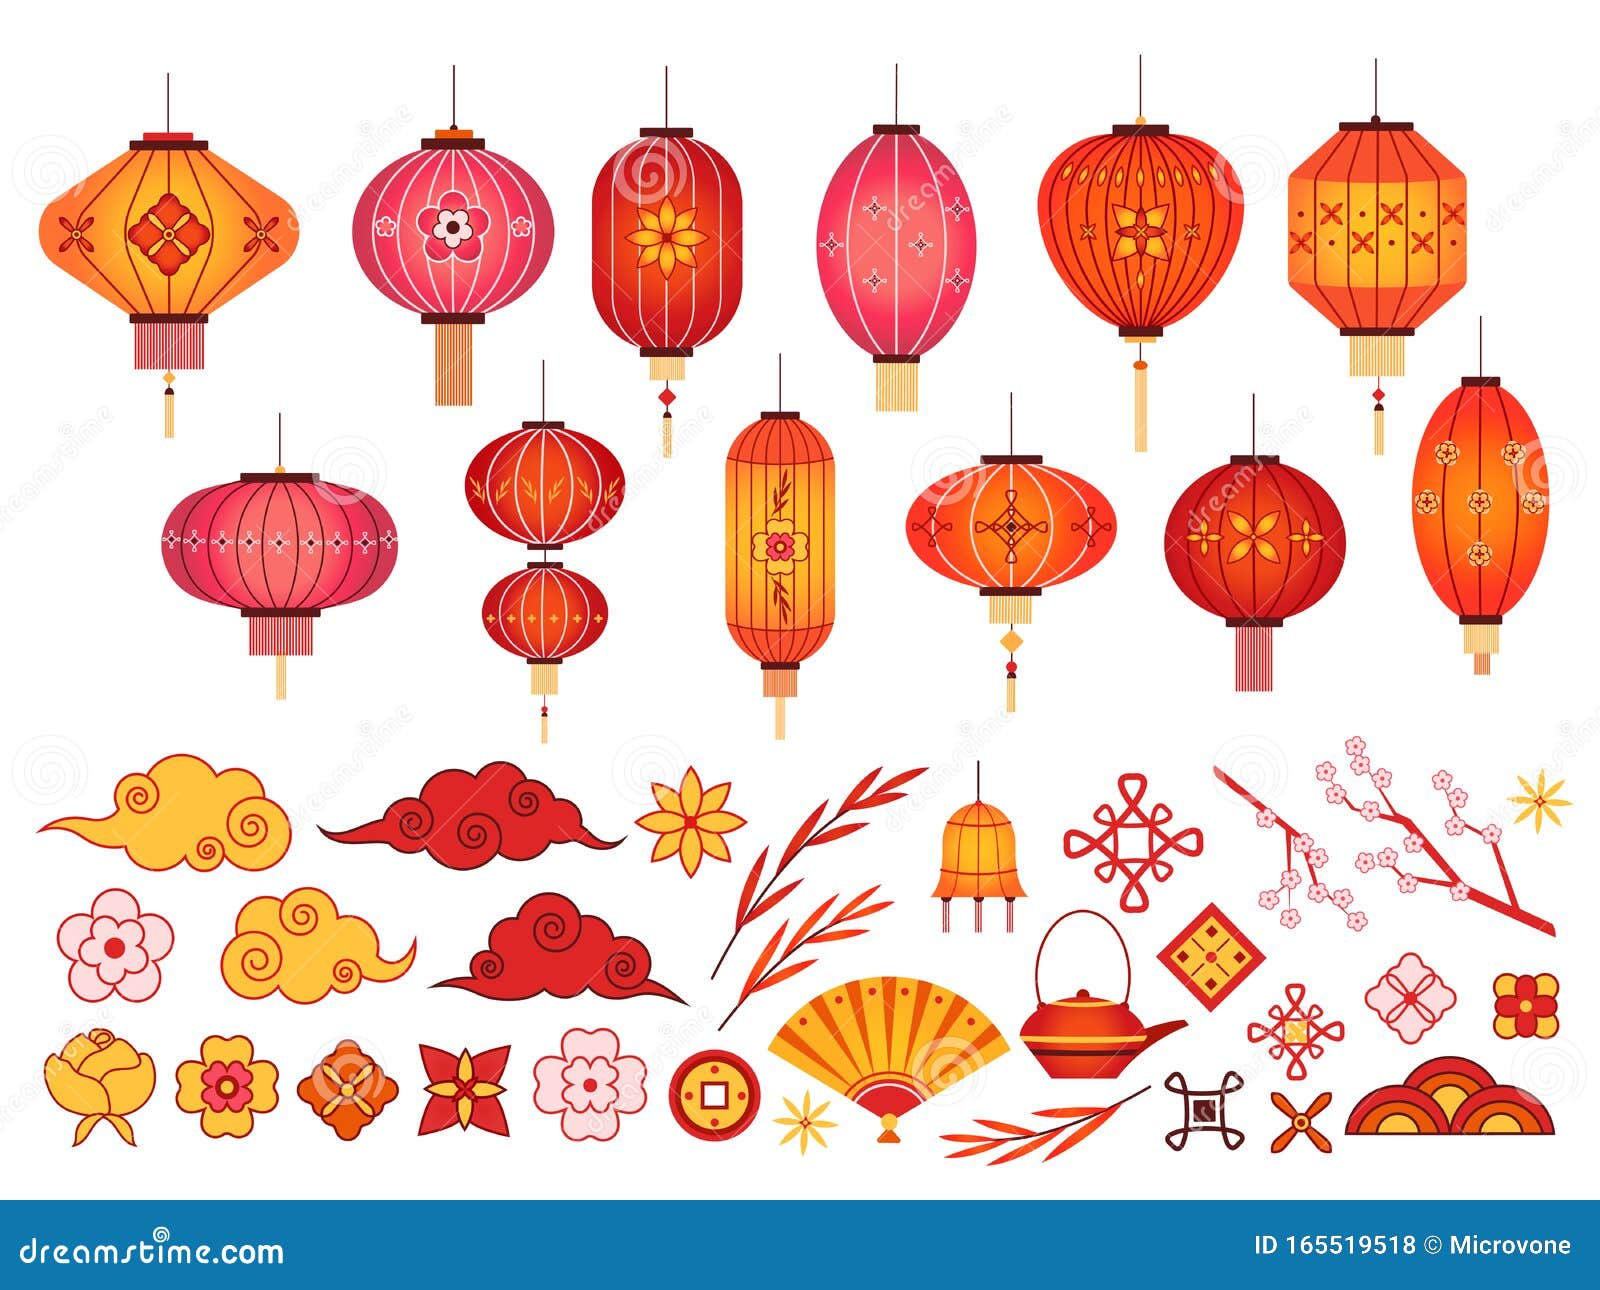 Chinese New Year Elements Asian Lantern Japanese Cloud And Sakura Branch Traditional Korean Flower And Pattern Stock Vector Illustration Of Design Decoration